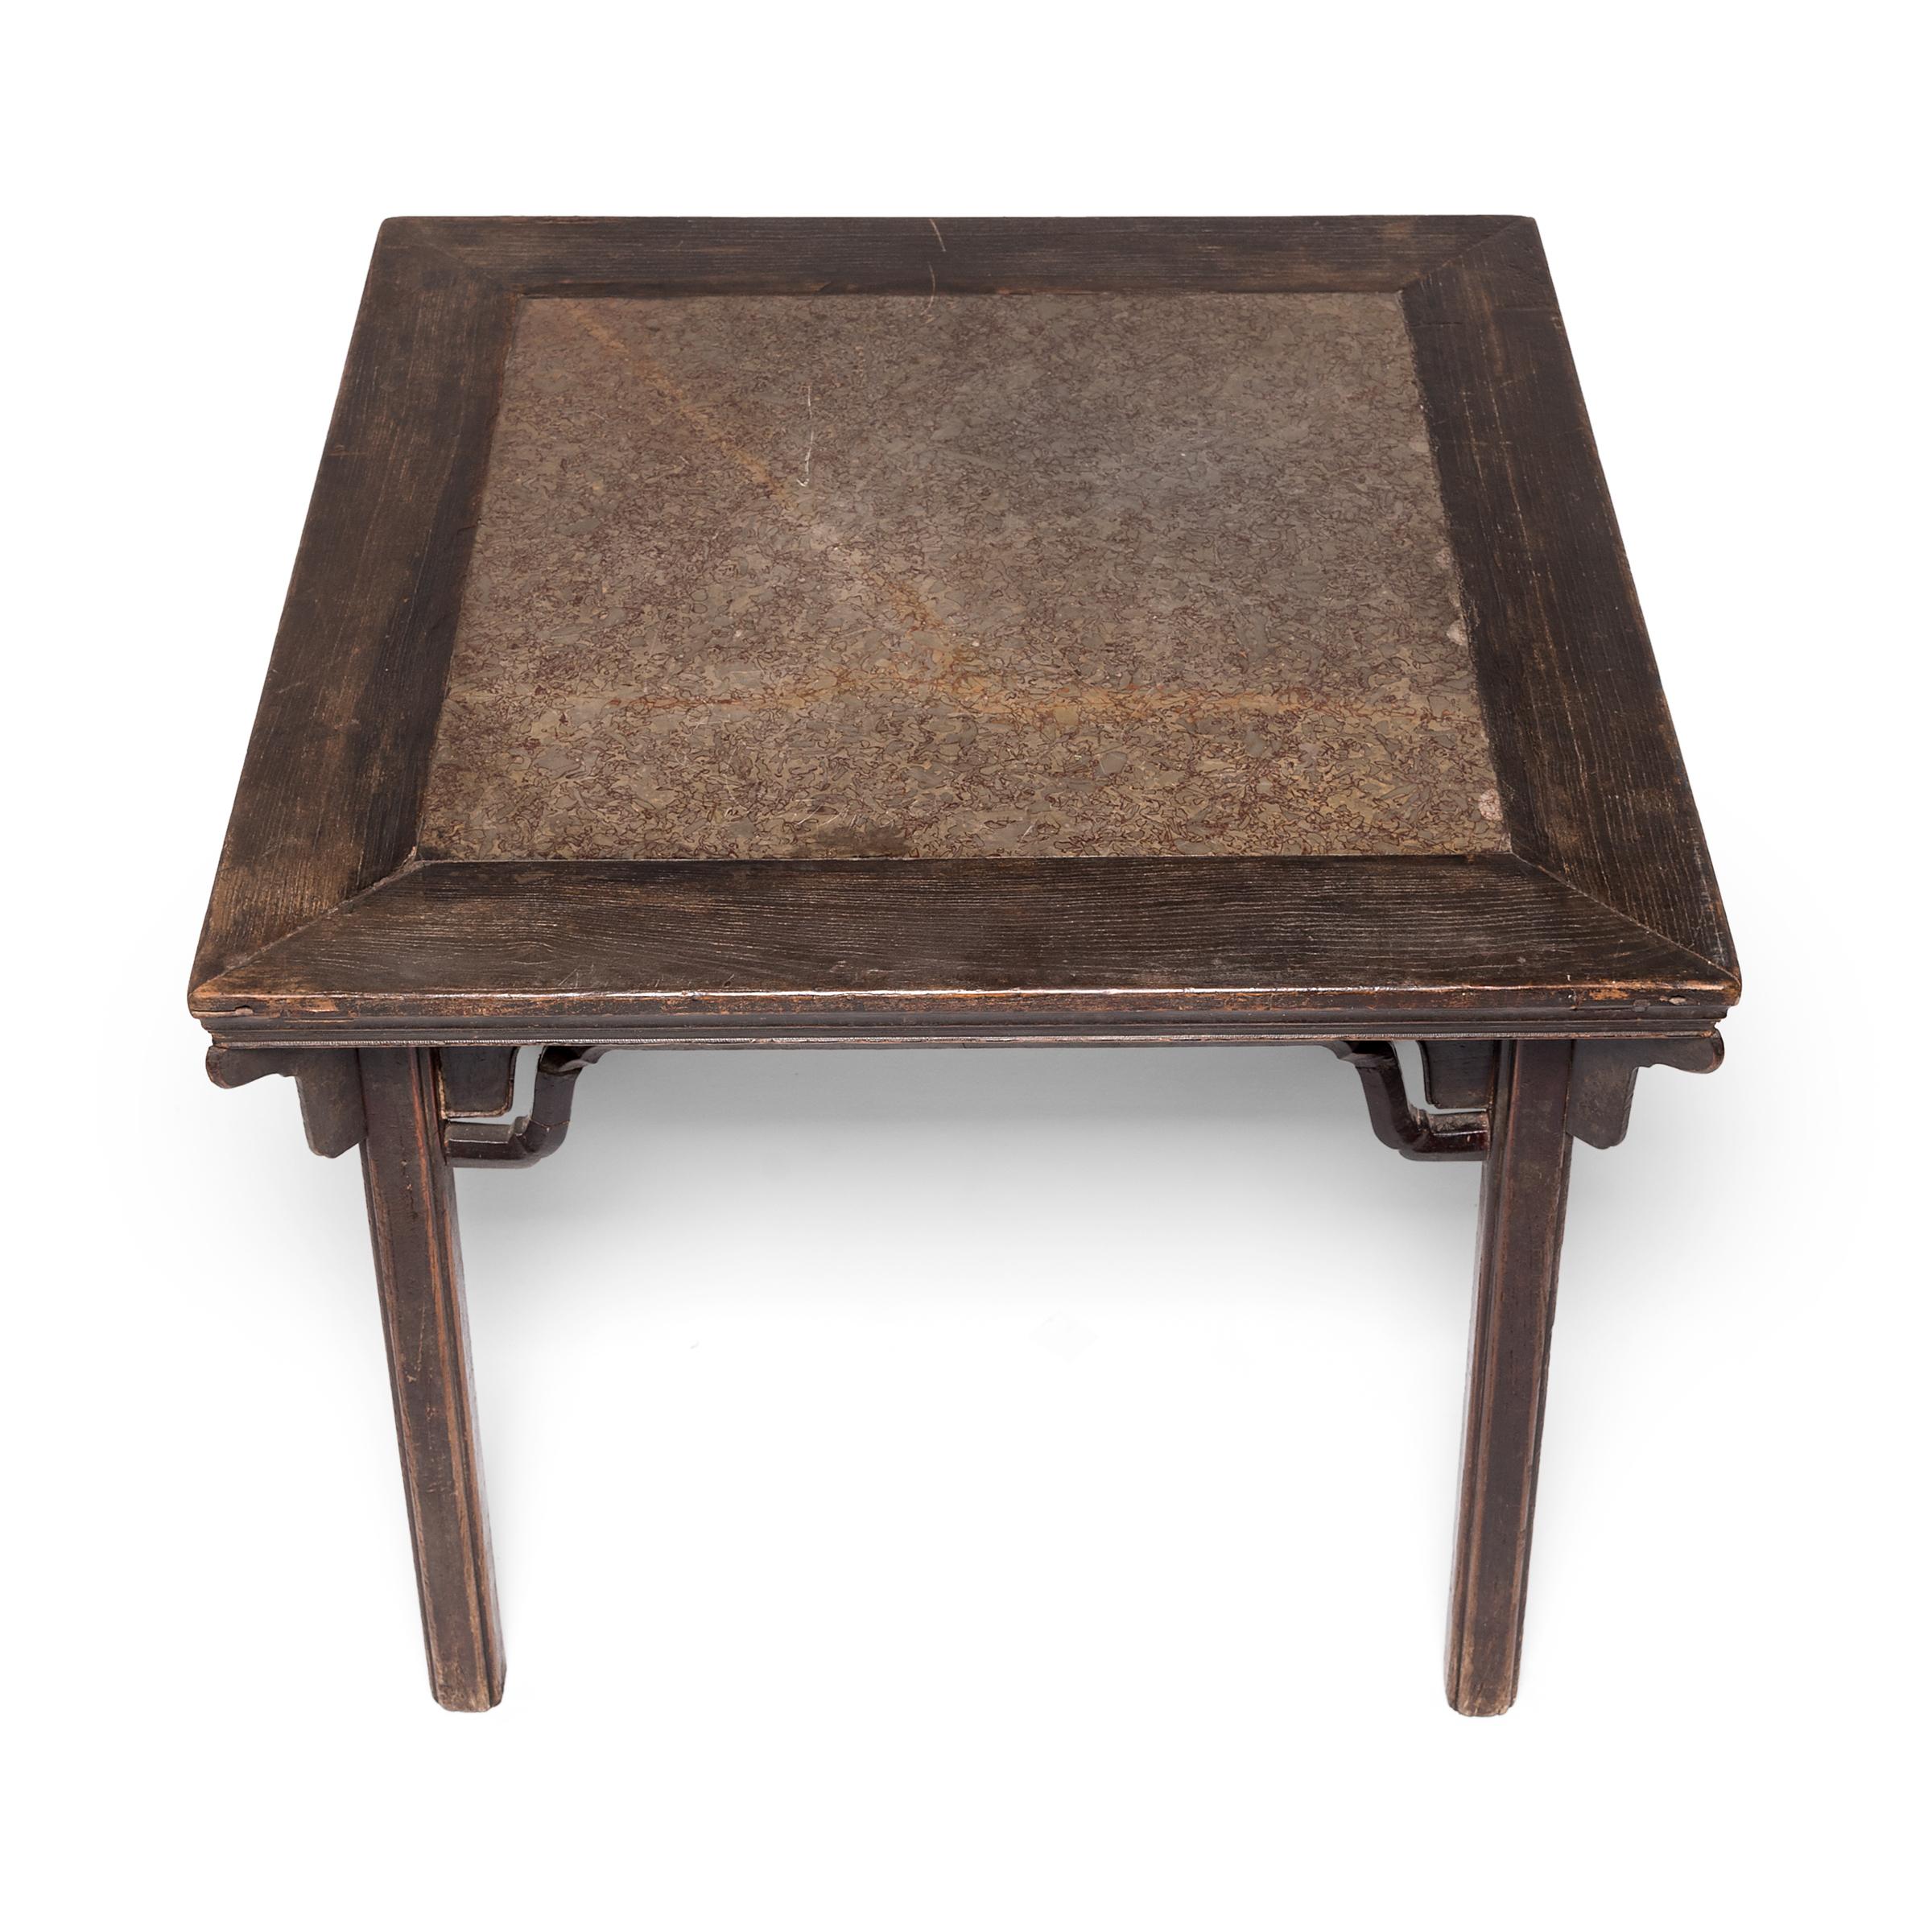 Chinese Eight Immortals Square Table with Puddingstone Inlay